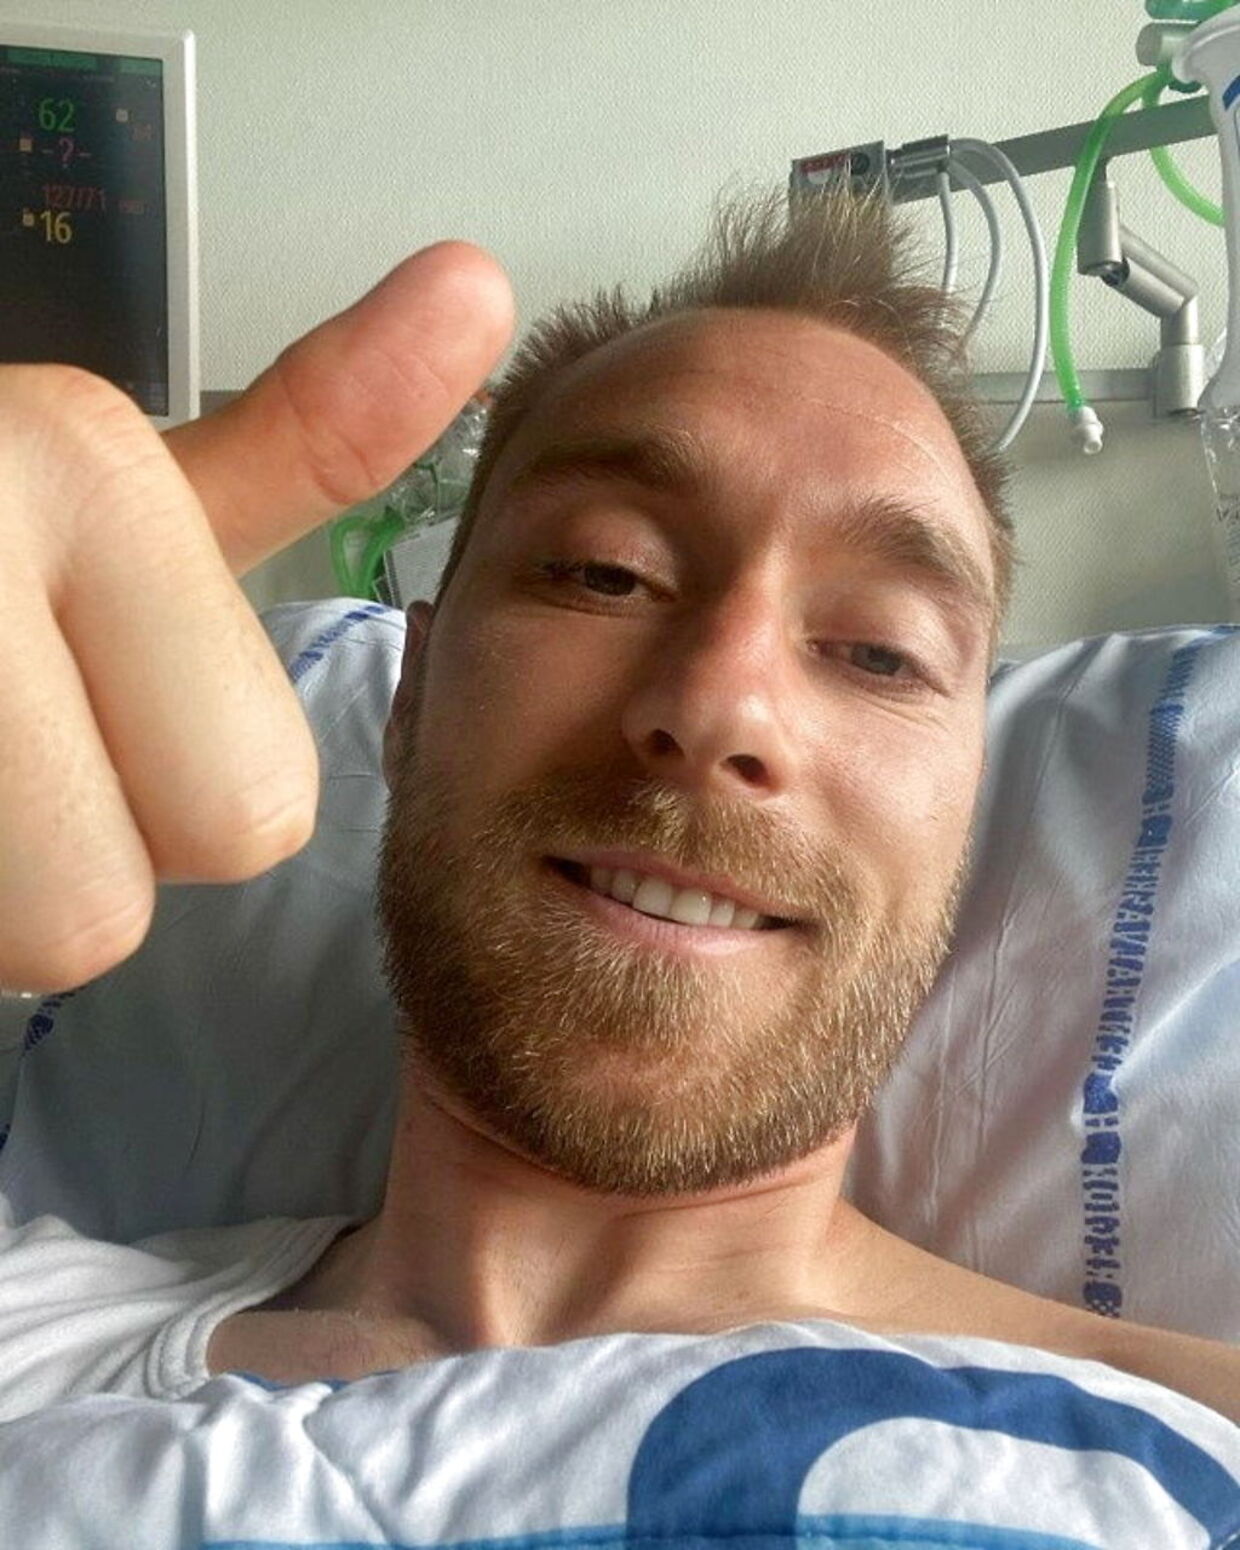 FILE PHOTO: Danish footballer Christian Eriksen gives a thumbs-up at Rigshospitalet, where he is treated after he collapsed during a UEFA Euro 2020 game on Saturday, in Copenhagen, Denmark, in this picture obtained from social media. Picture published June 15, 2021. Danish Football Association/via REUTERS/File Photo